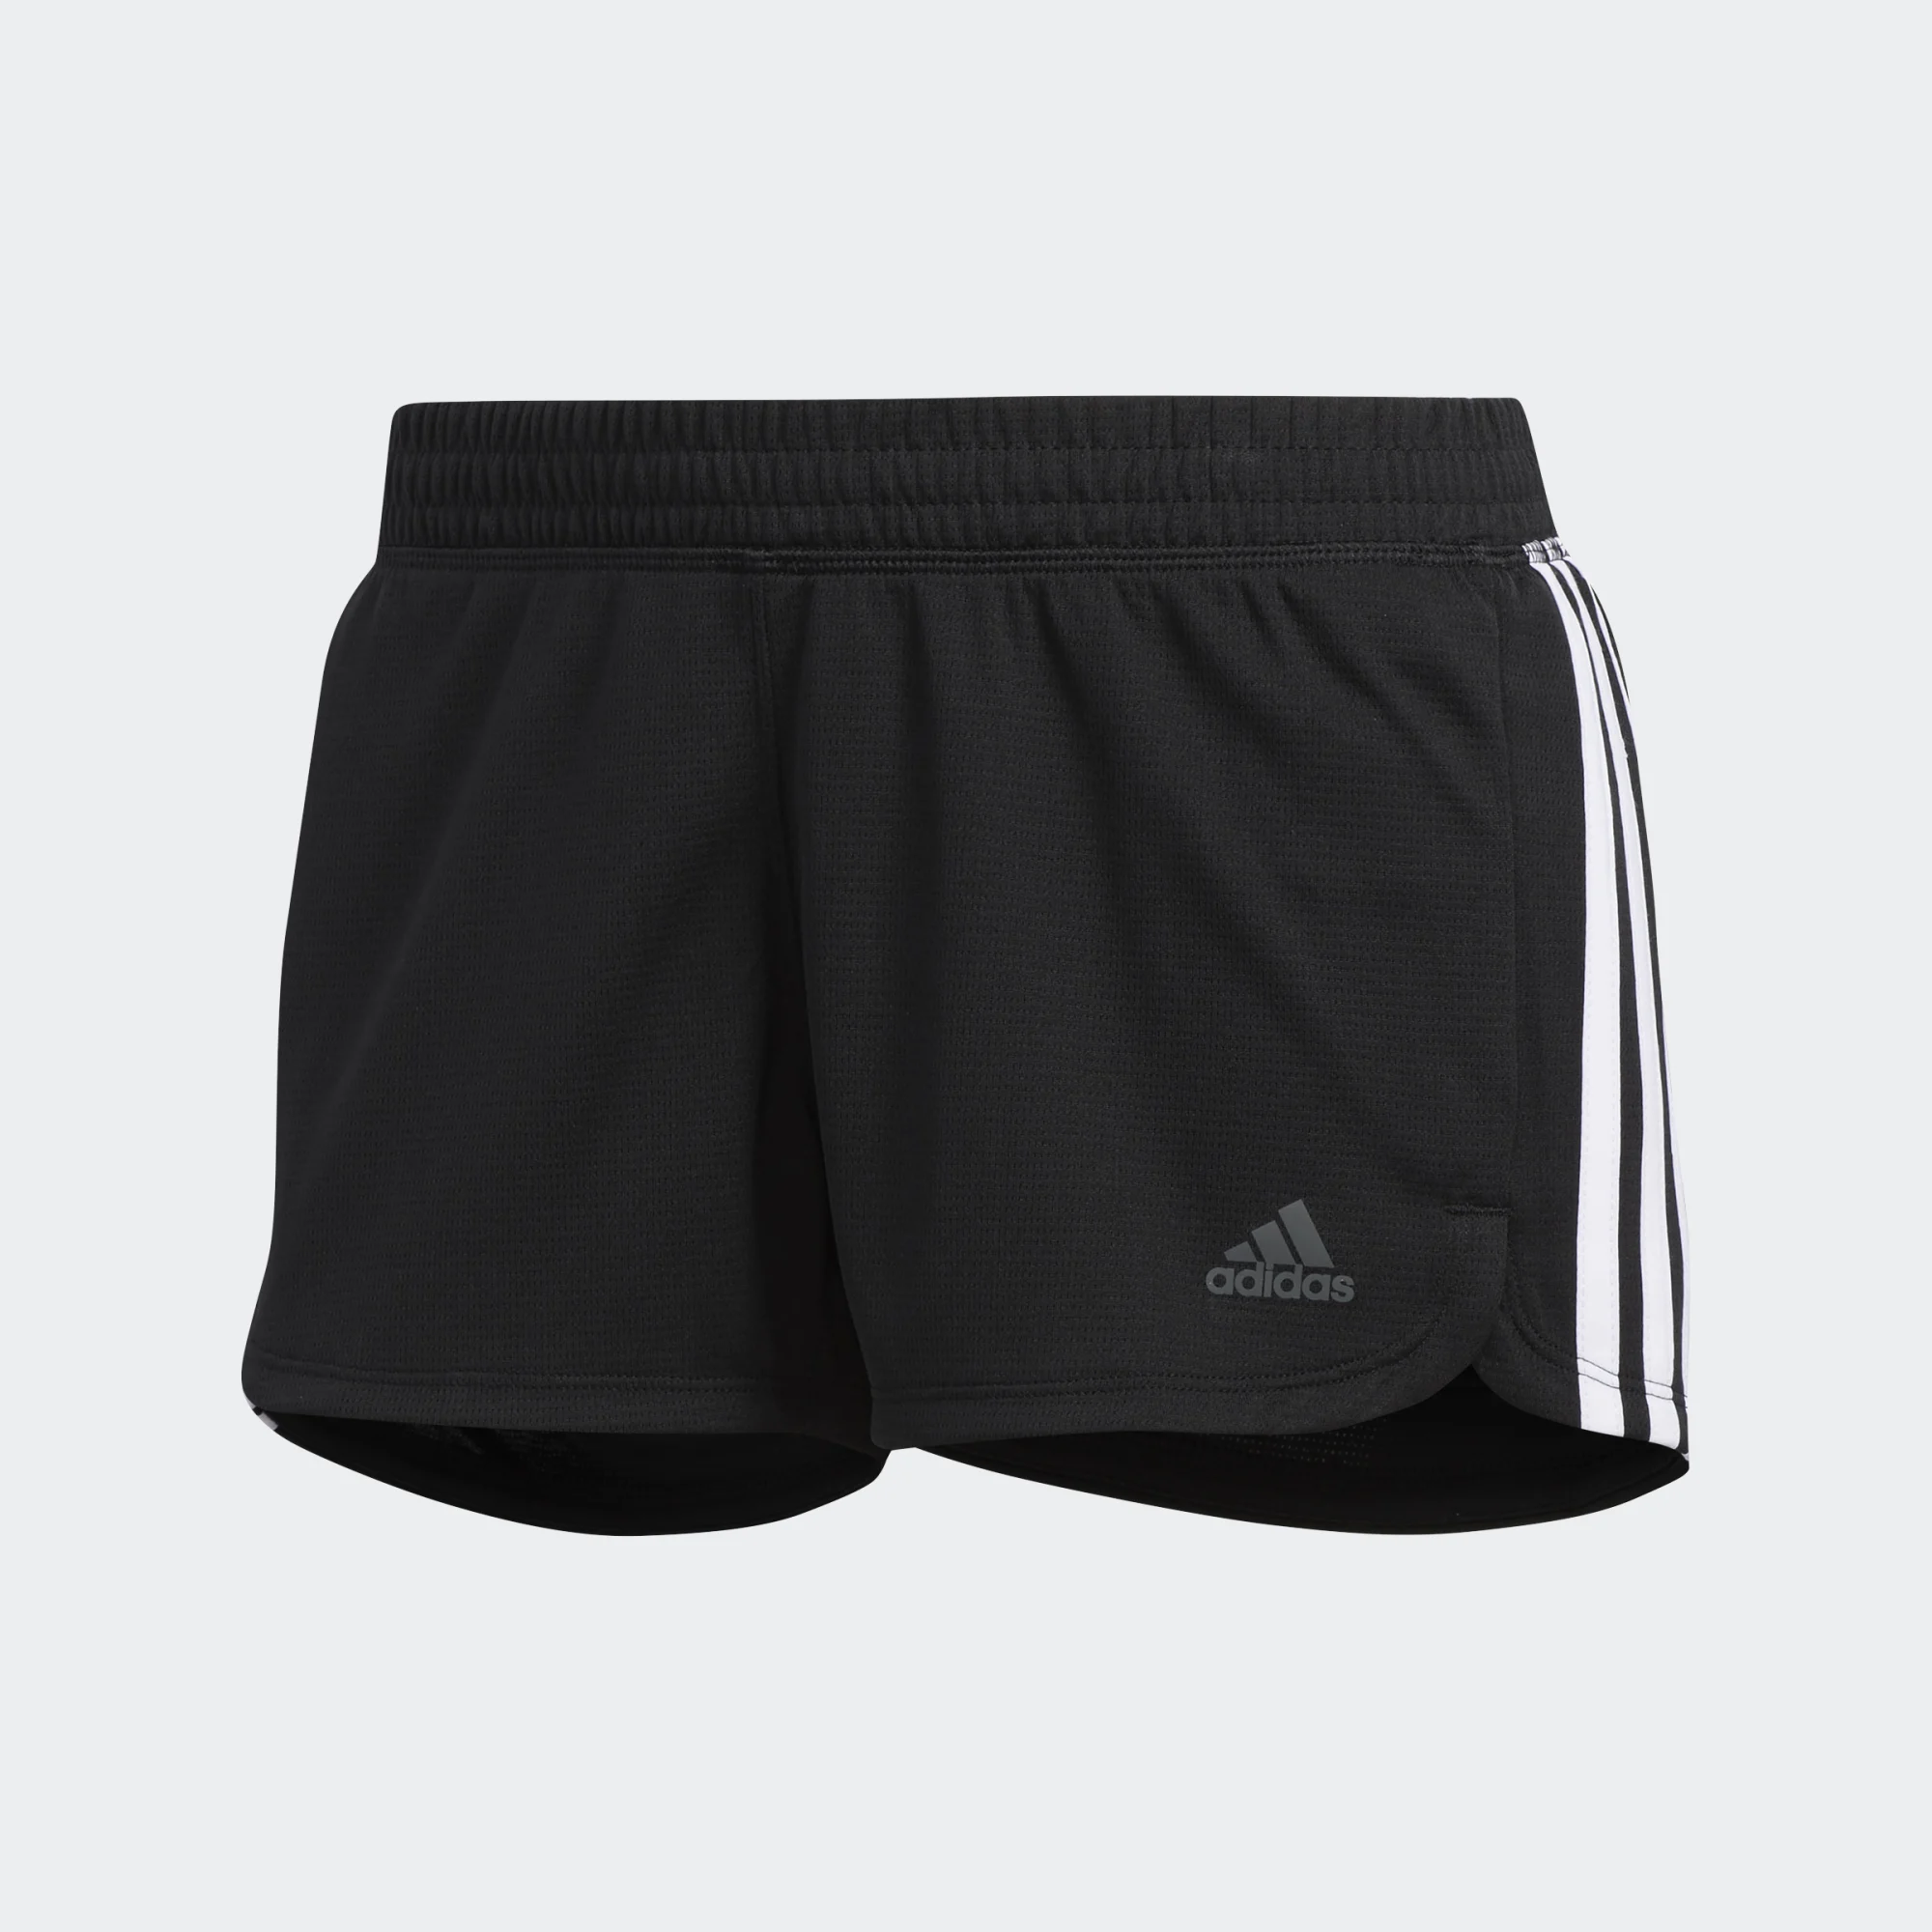 ADIDAS PACER 3-STRIPES KNIT SHORT